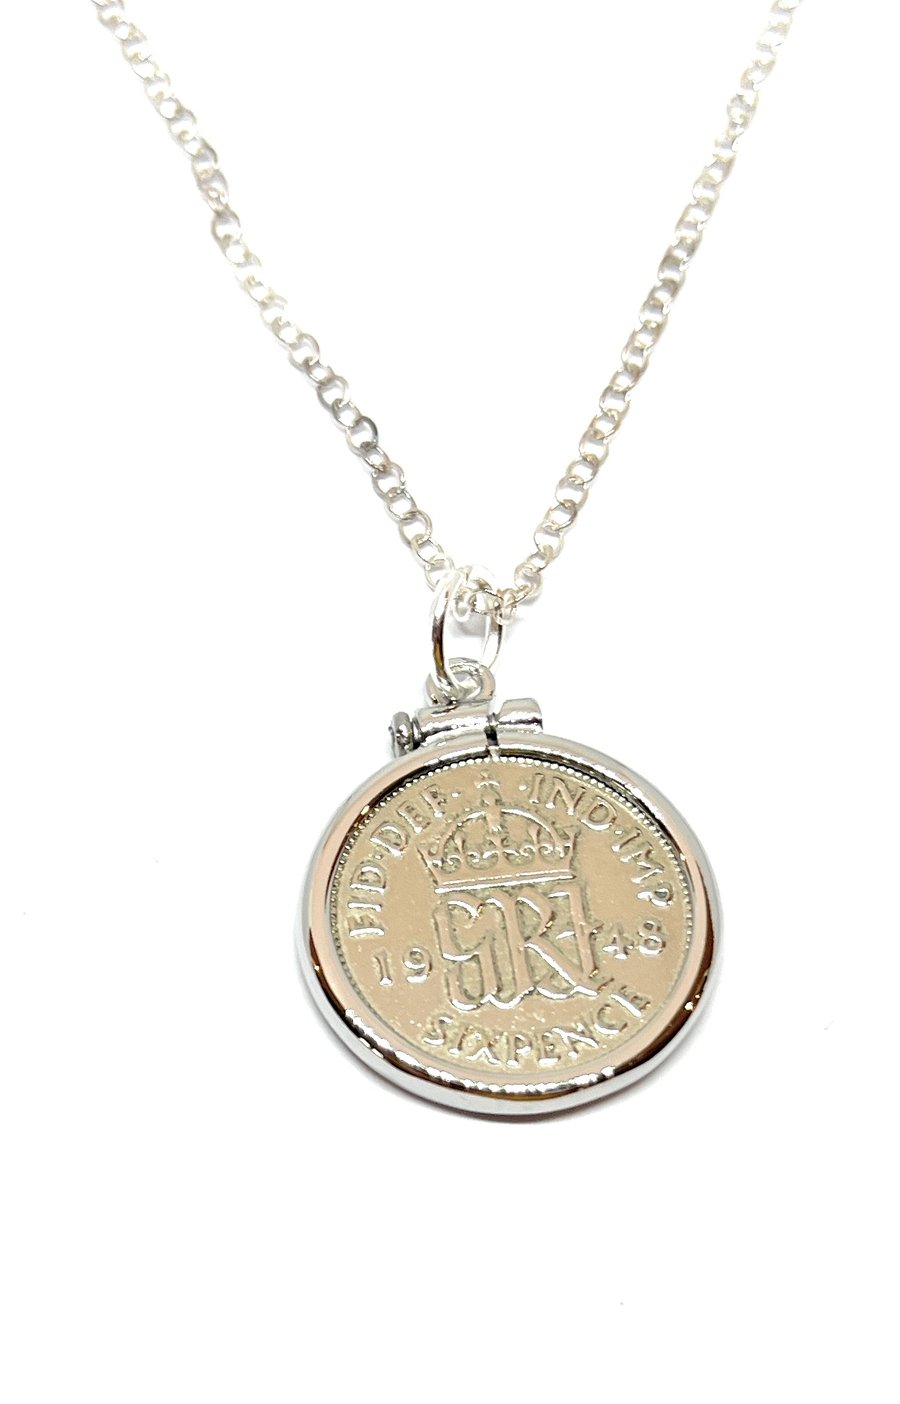 1948 76th Birthday Anniversary sixpence coin pendant plus 20inch SS chain gift